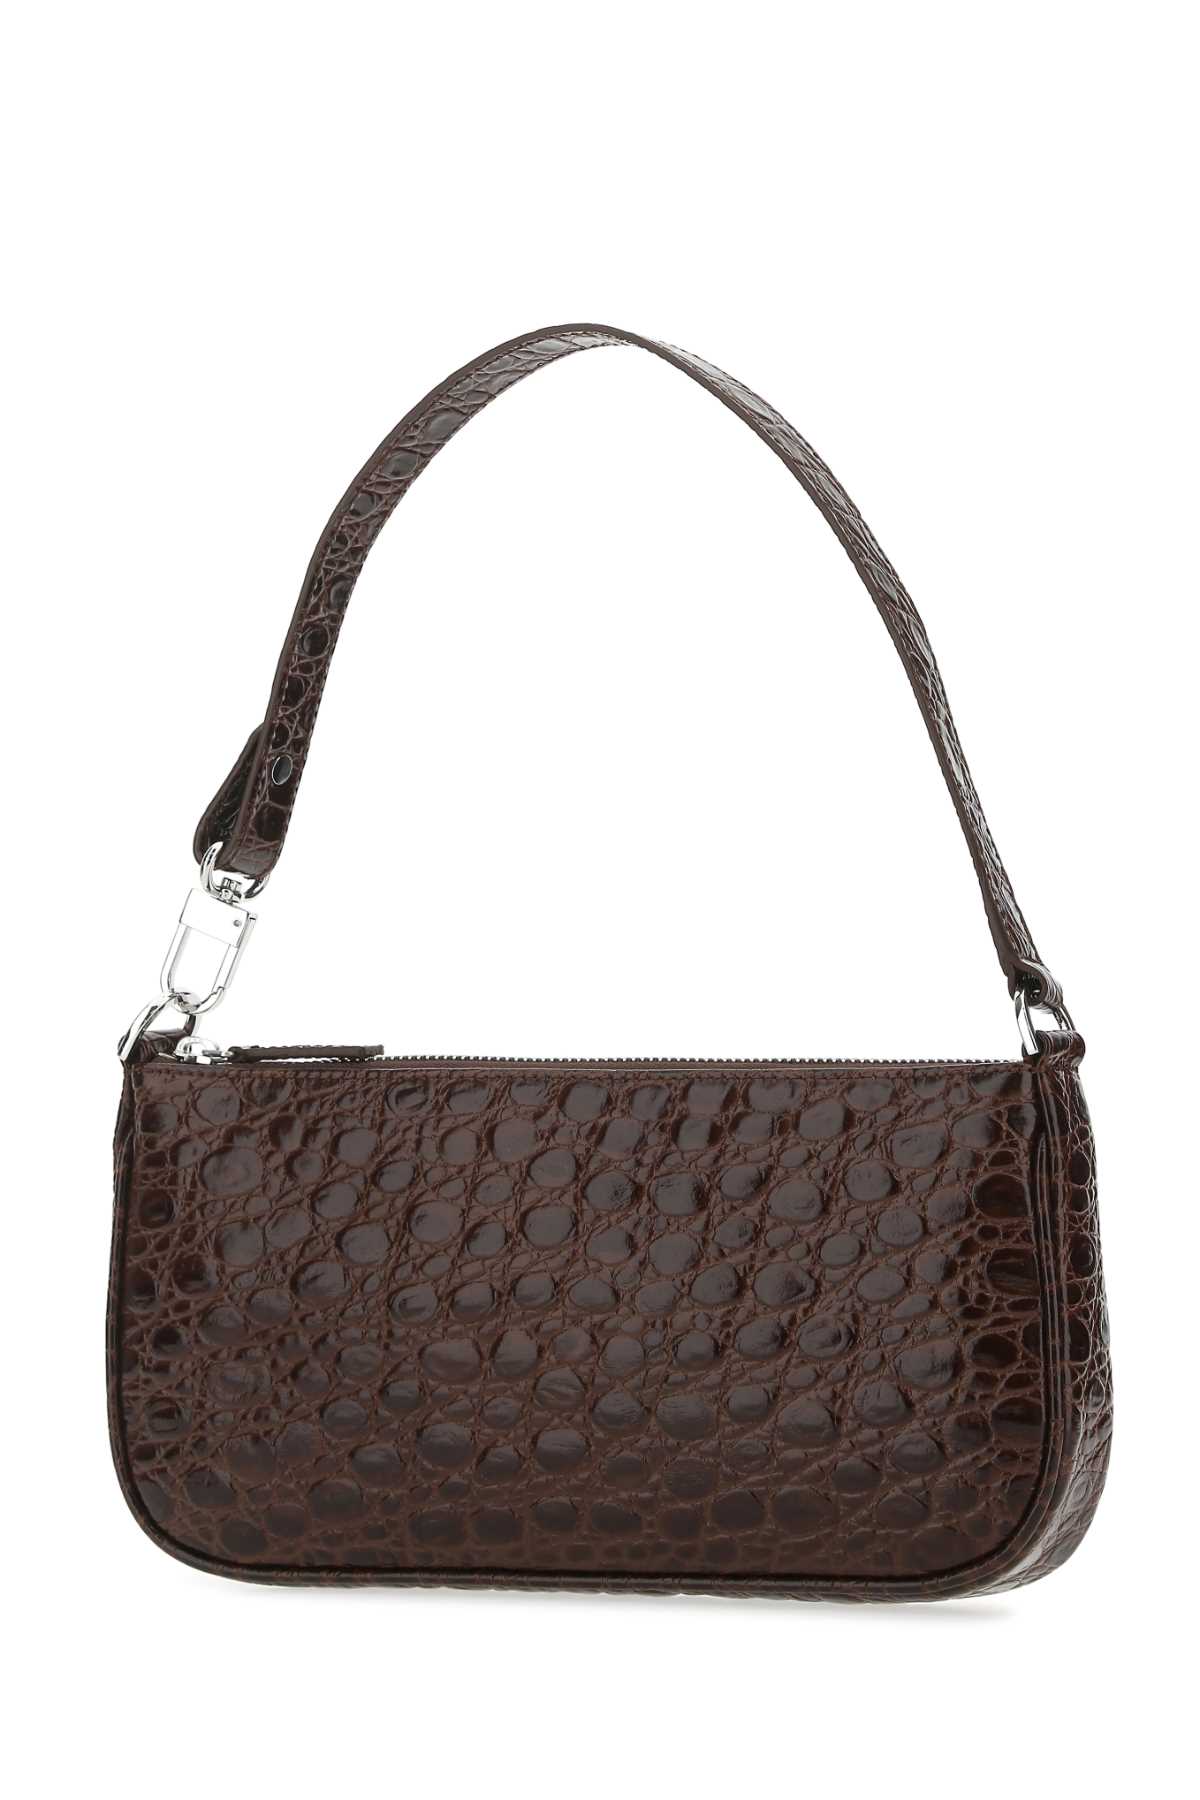 By Far Chocolate Leather Shoulder Bag In Seq